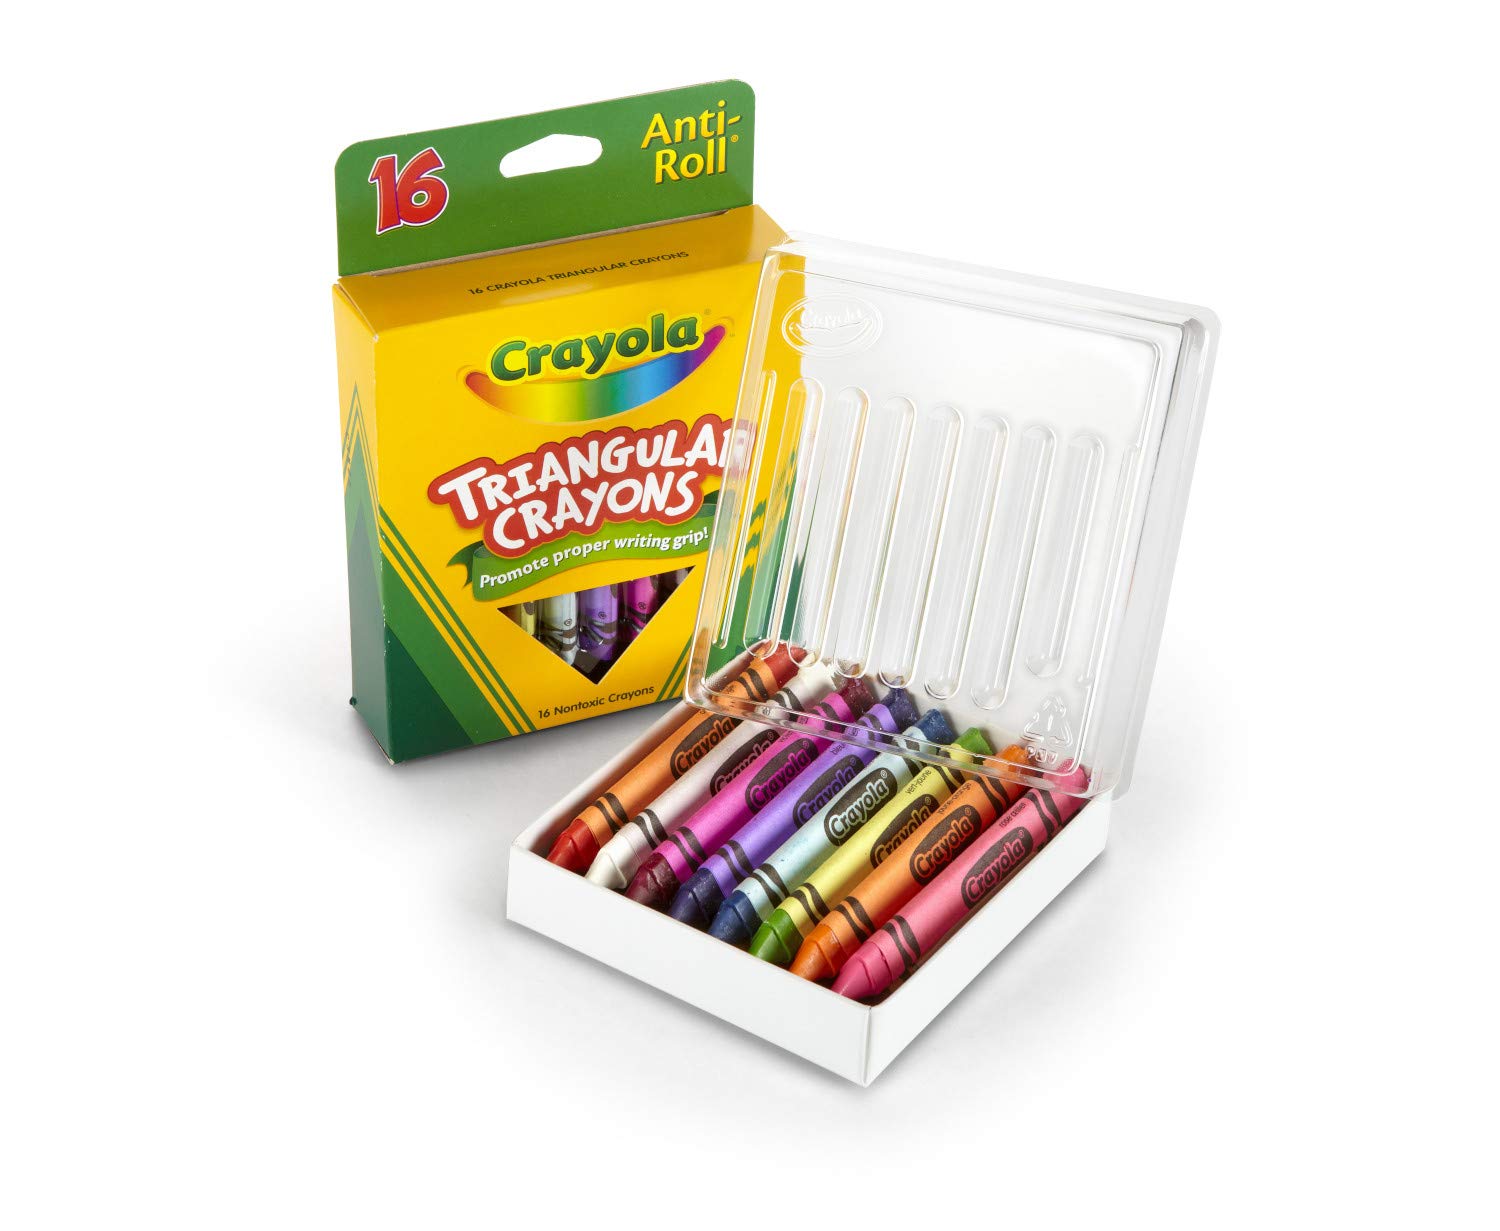 Crayola Triangular Crayons, Toddler Crayons, Coloring Gift for Kids Assorted, 7/16 X 4 in